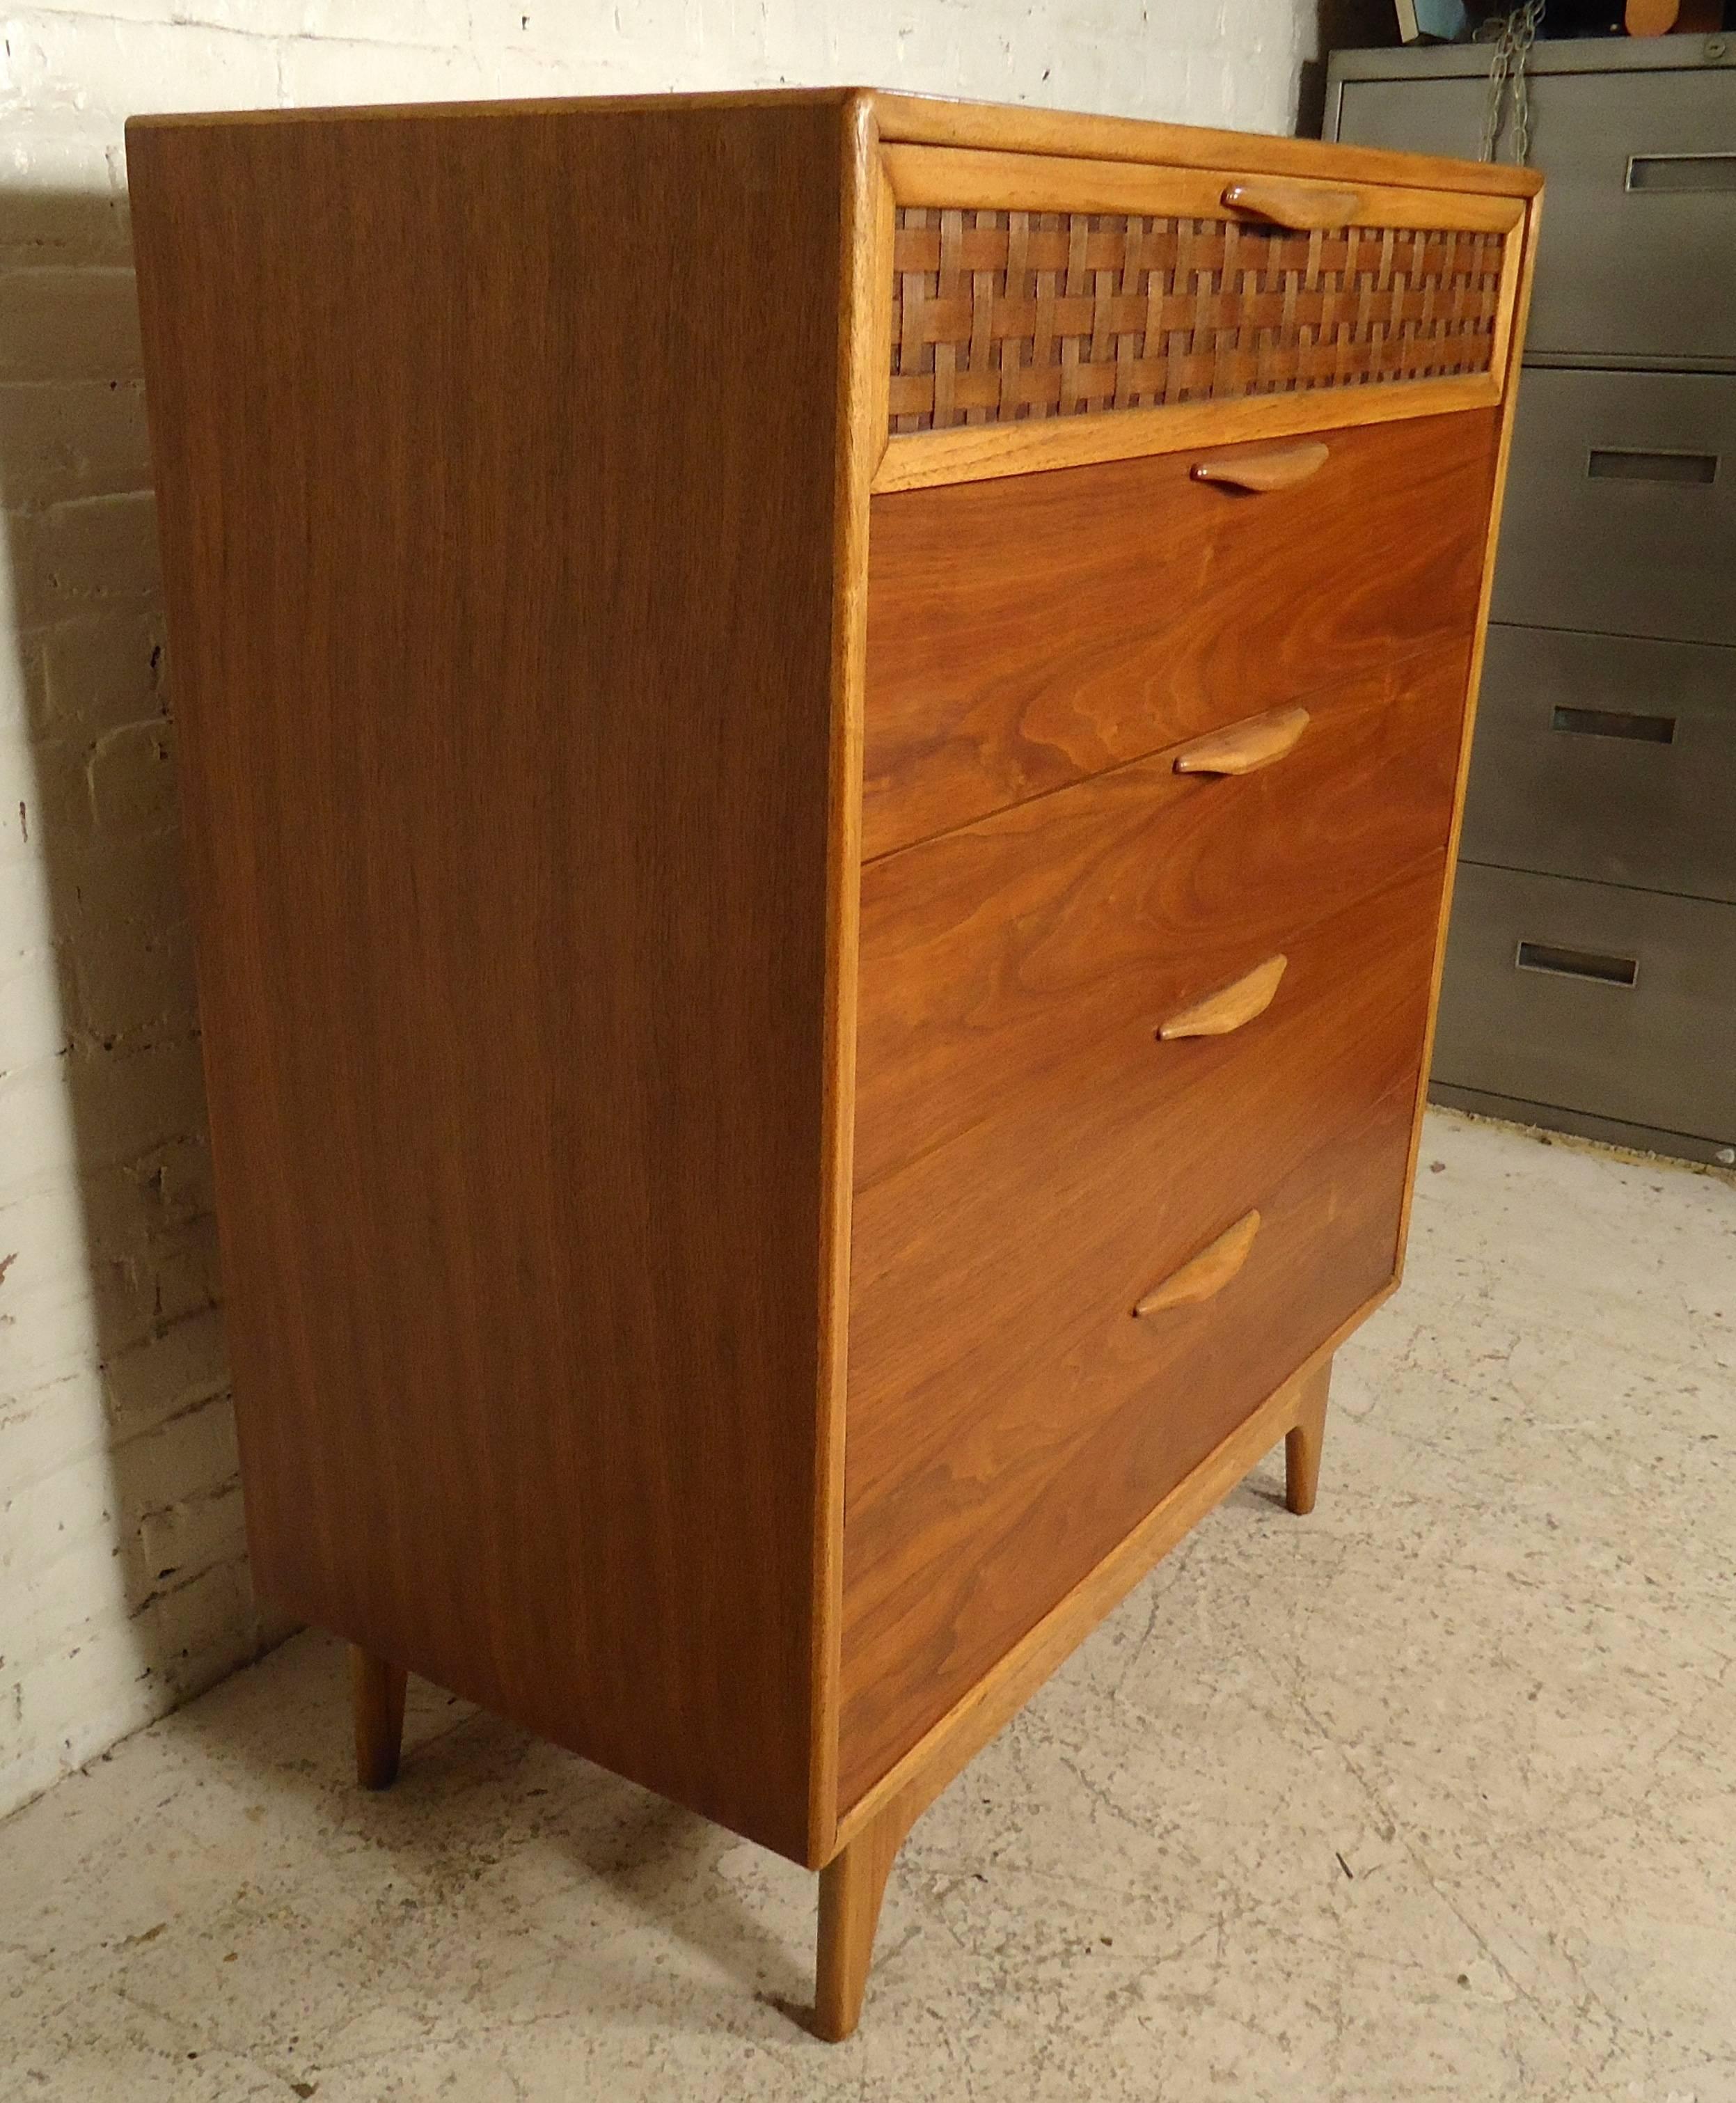 Vintage-modern dresser by Lane with basket woven top drawer. Features flowing walnut grain, five spacious drawers, and carved wood handles. Great accenting oak and walnut grain.

Please confirm item location (NY or NJ).